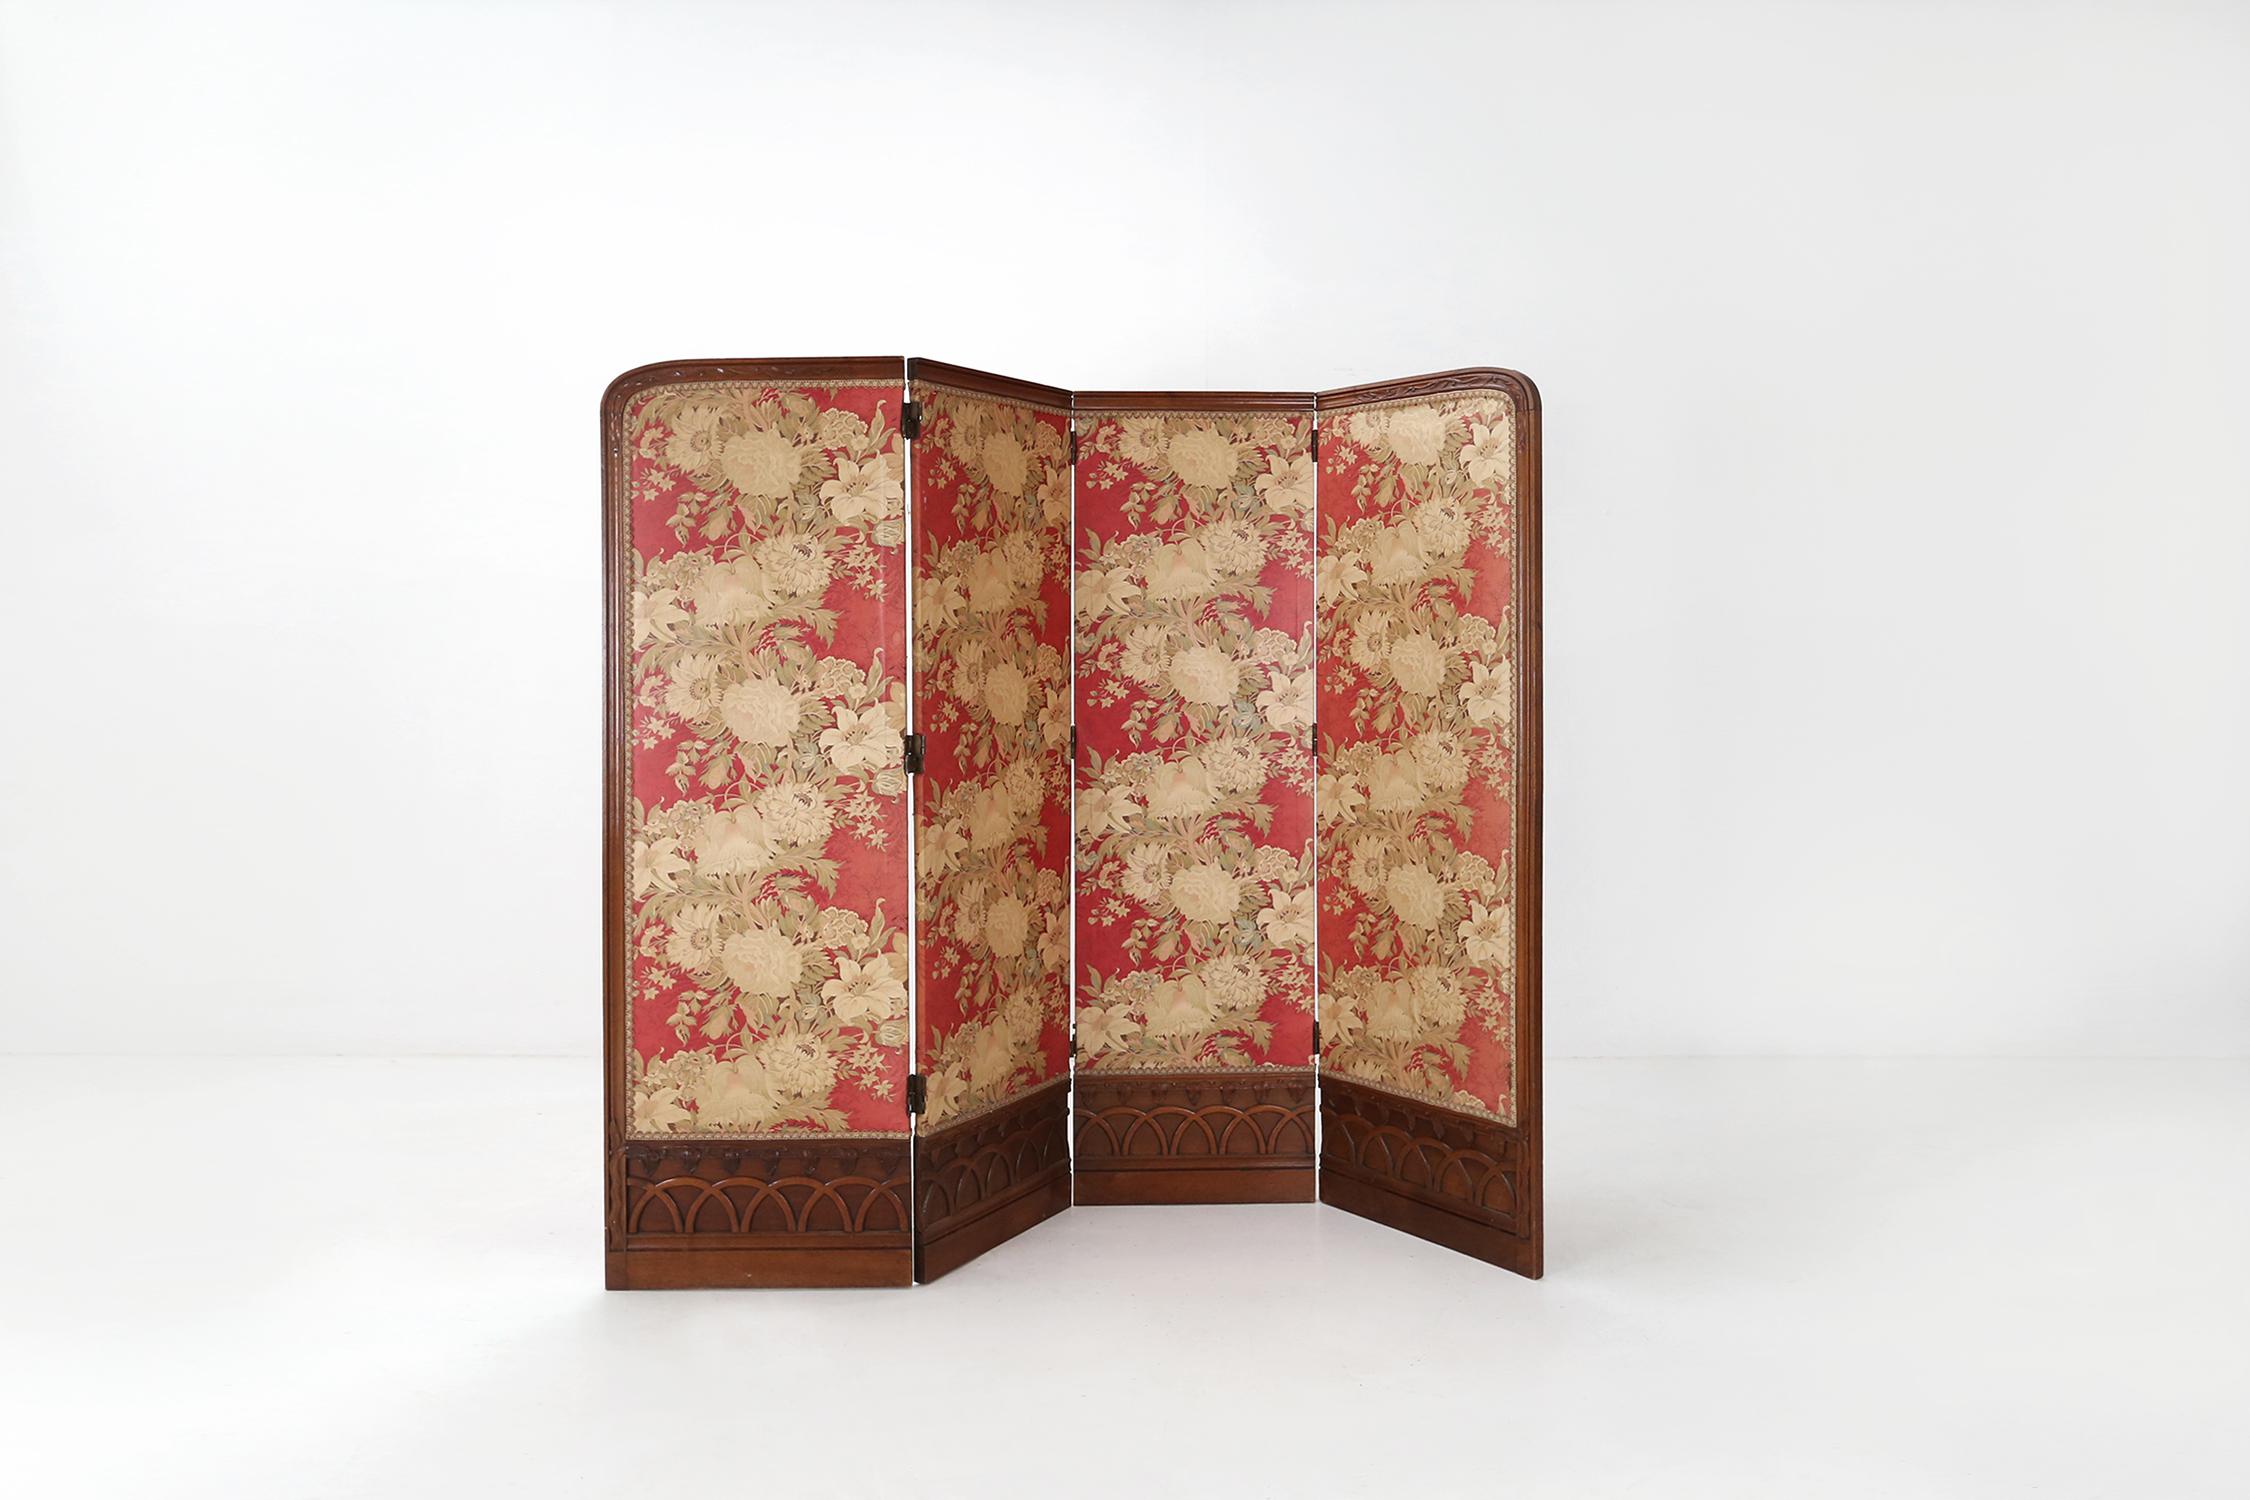 Antique room divider made of solid wood and fabric with a flower pattern, red on the other side.
With some nice sculpture details in the wooden frame.

Dimensions closed:
Width: 50 cm
Depth: 11 cm

Dimensions open:
Width: 189 cm
Depth: 3 cm